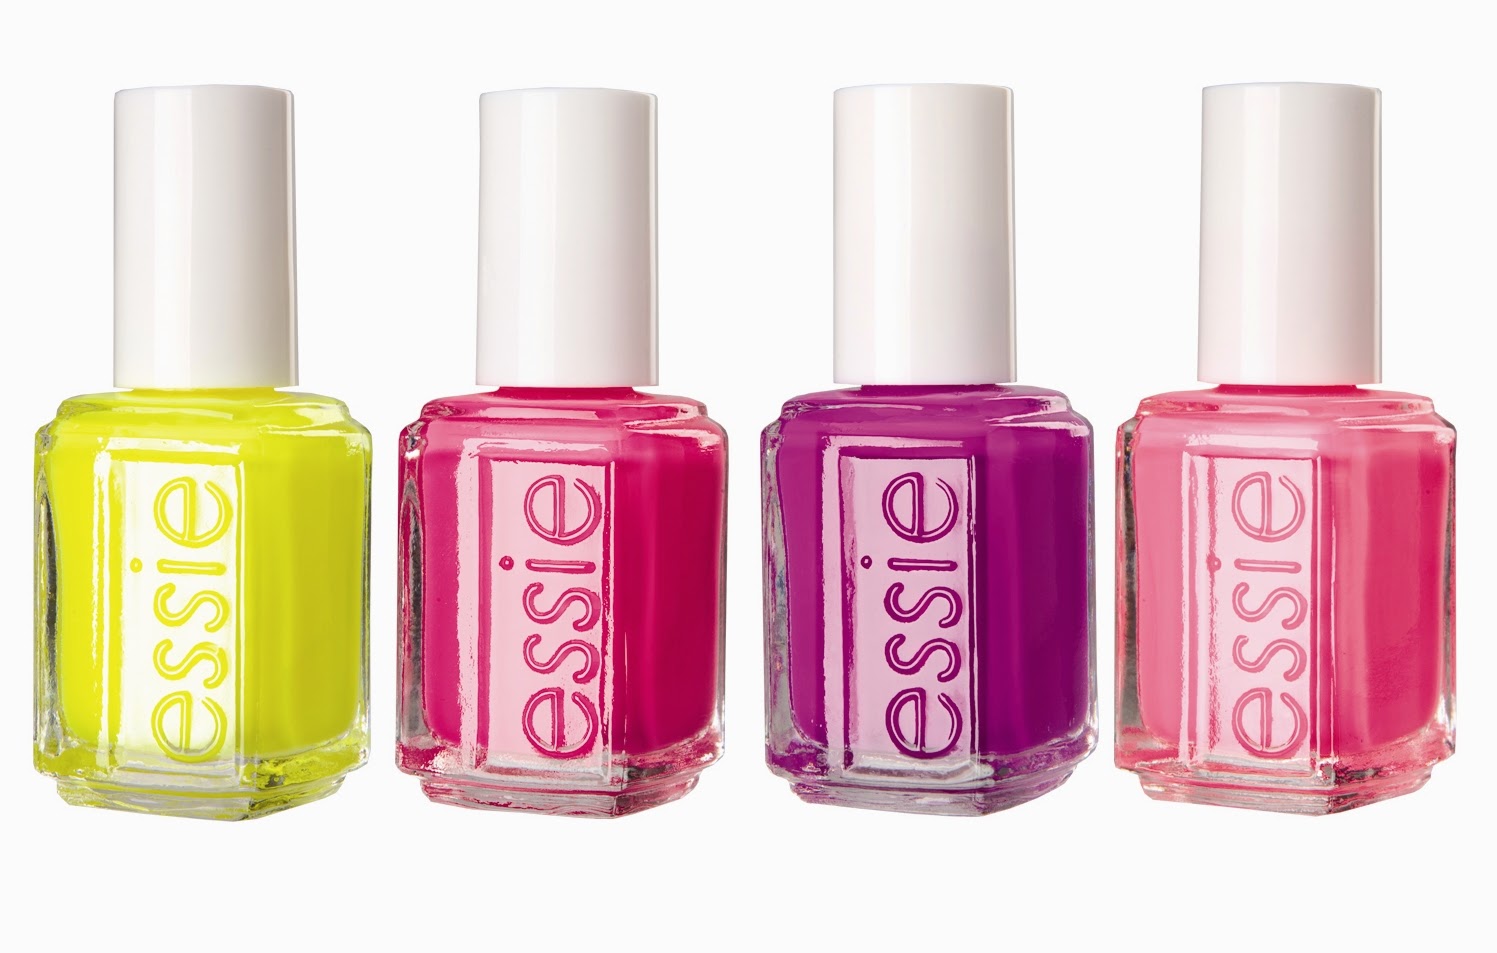 2. Essie Nail Polish in "In the Lobby" - wide 6